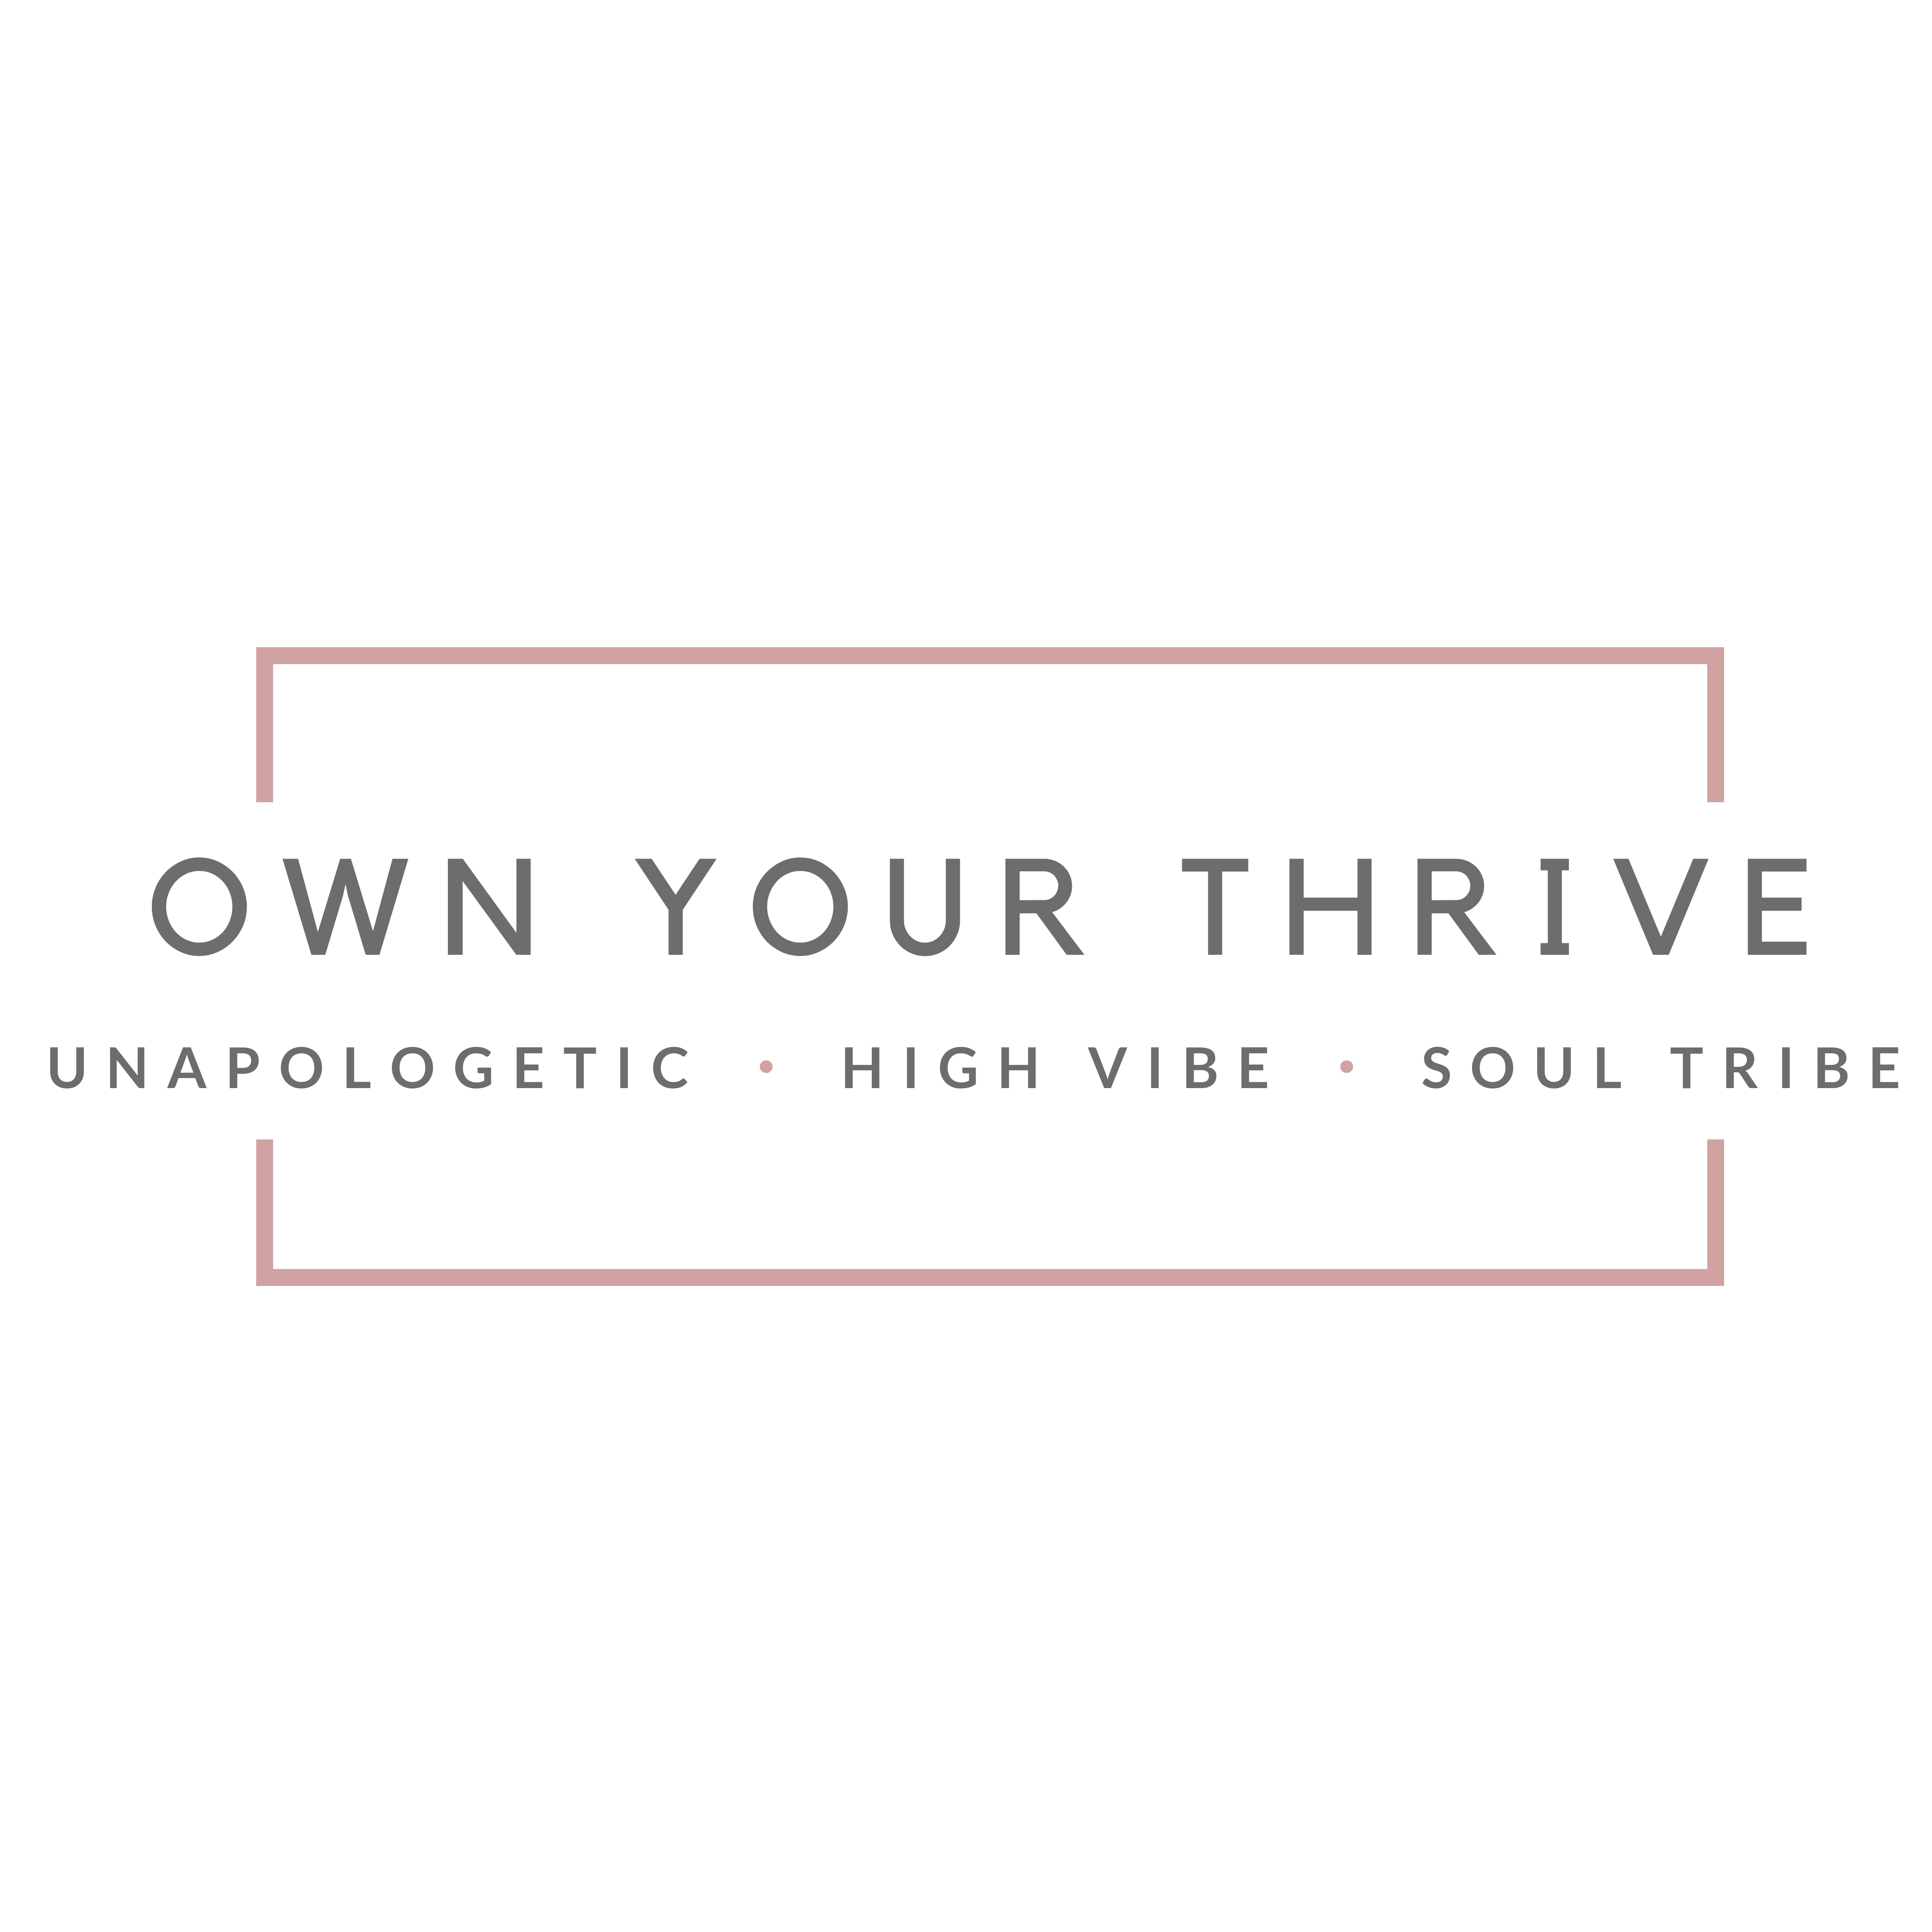 Own Your Thrive logo